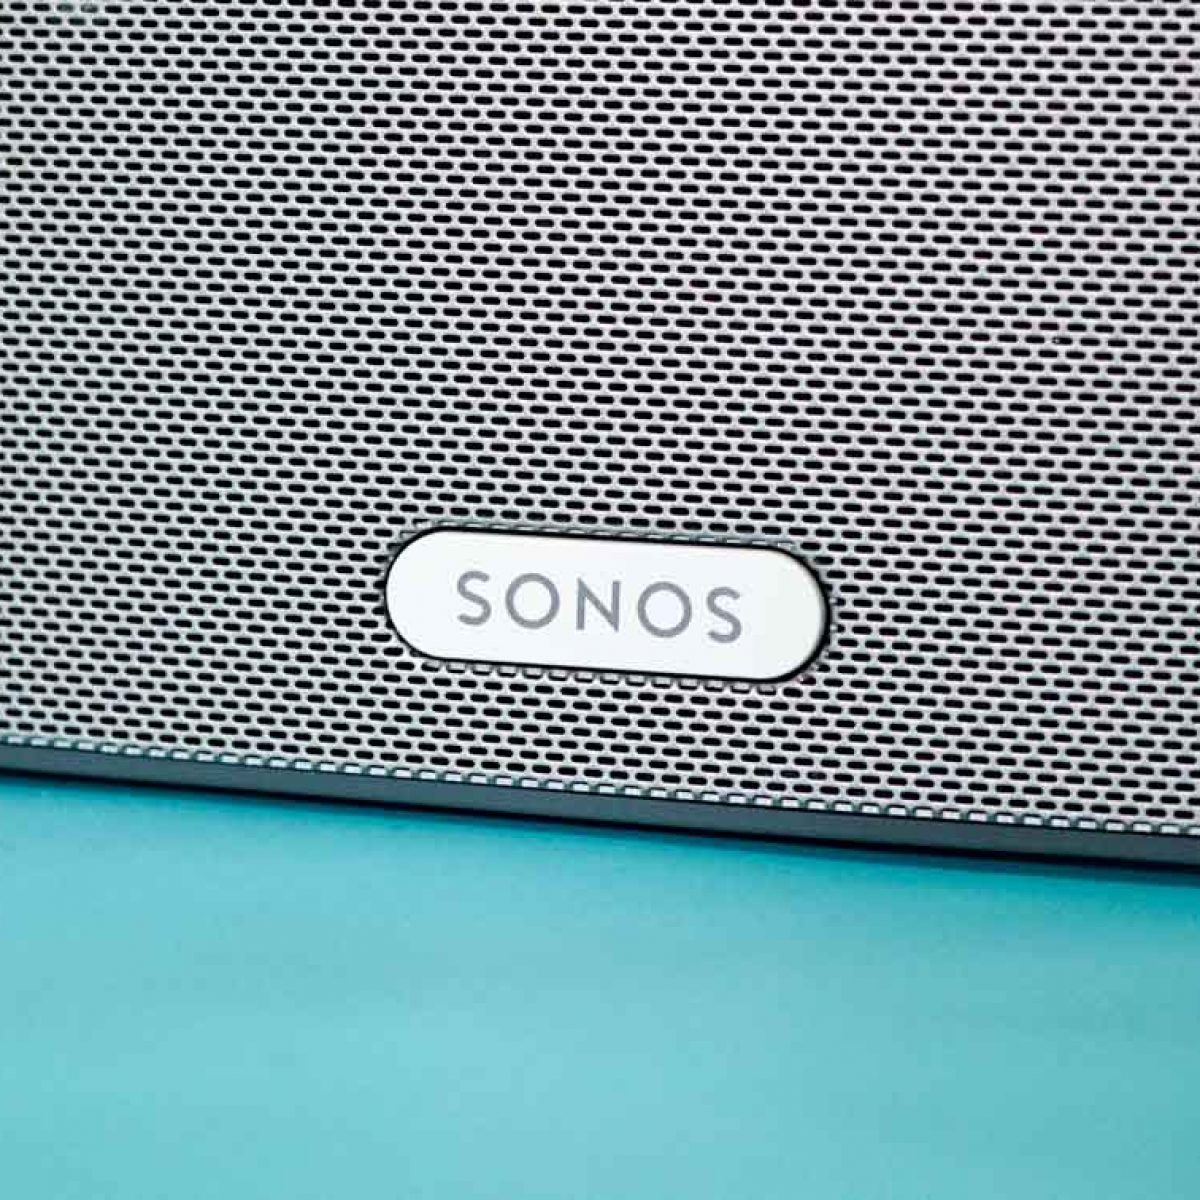 You Can Now Sonos as Your Default Speaker for Assistant Devices